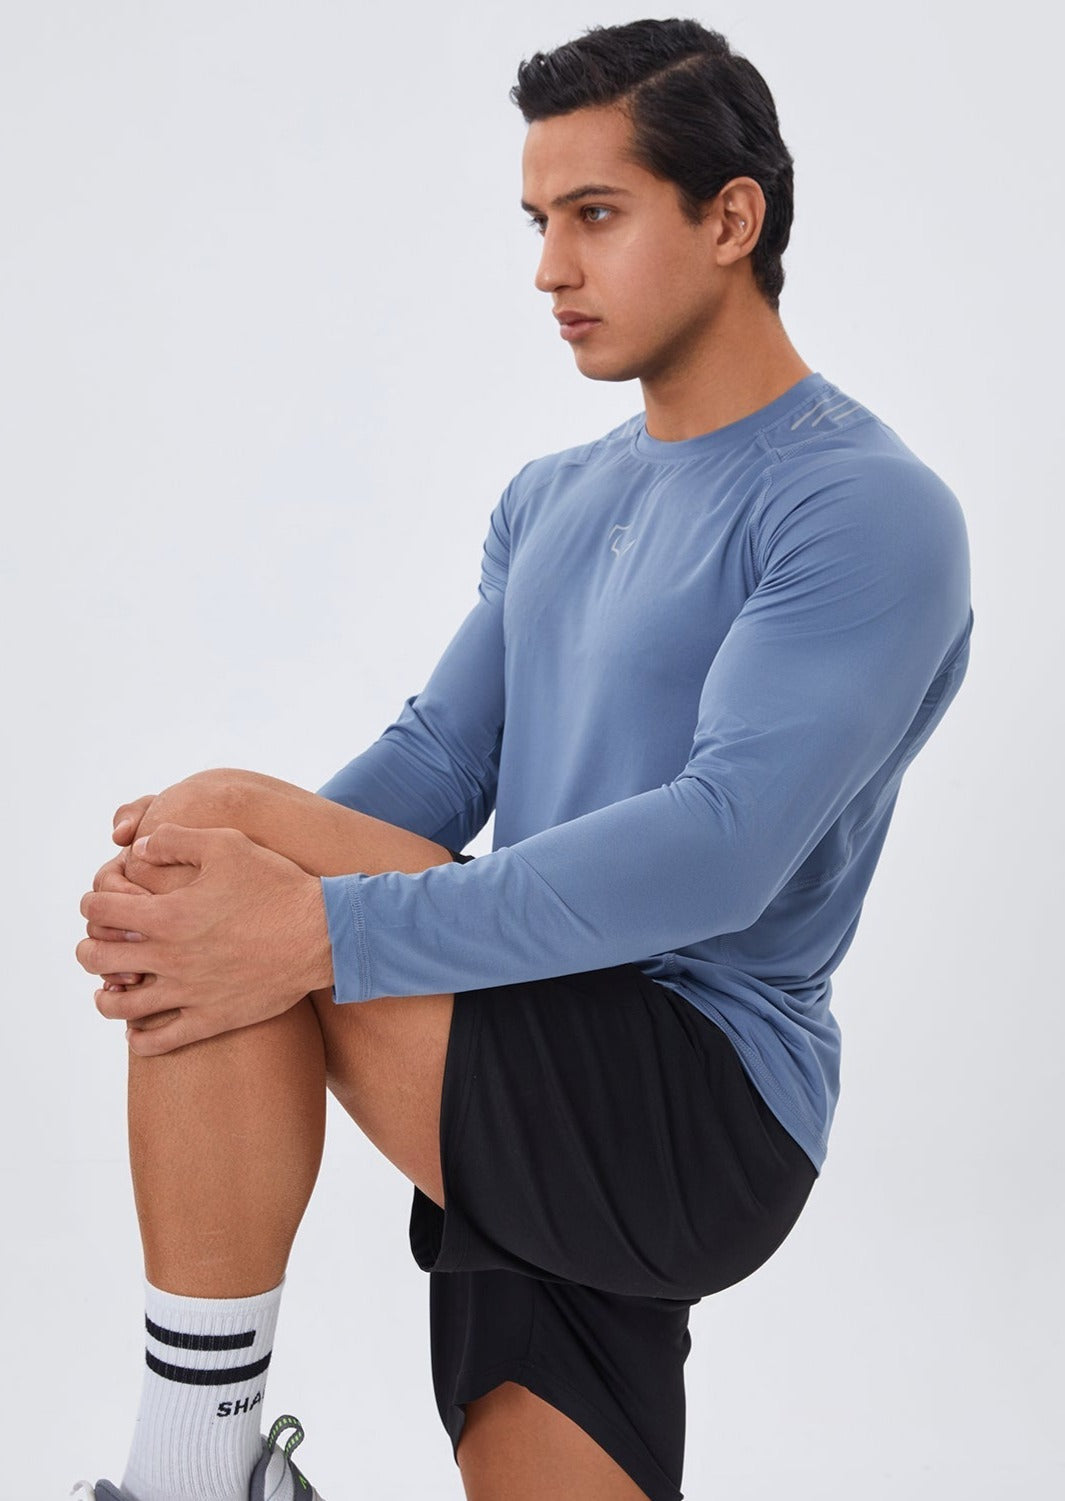 COMPRESSION FIT Long Sleeve CORE LONG SLEEVE - STONE BLUE